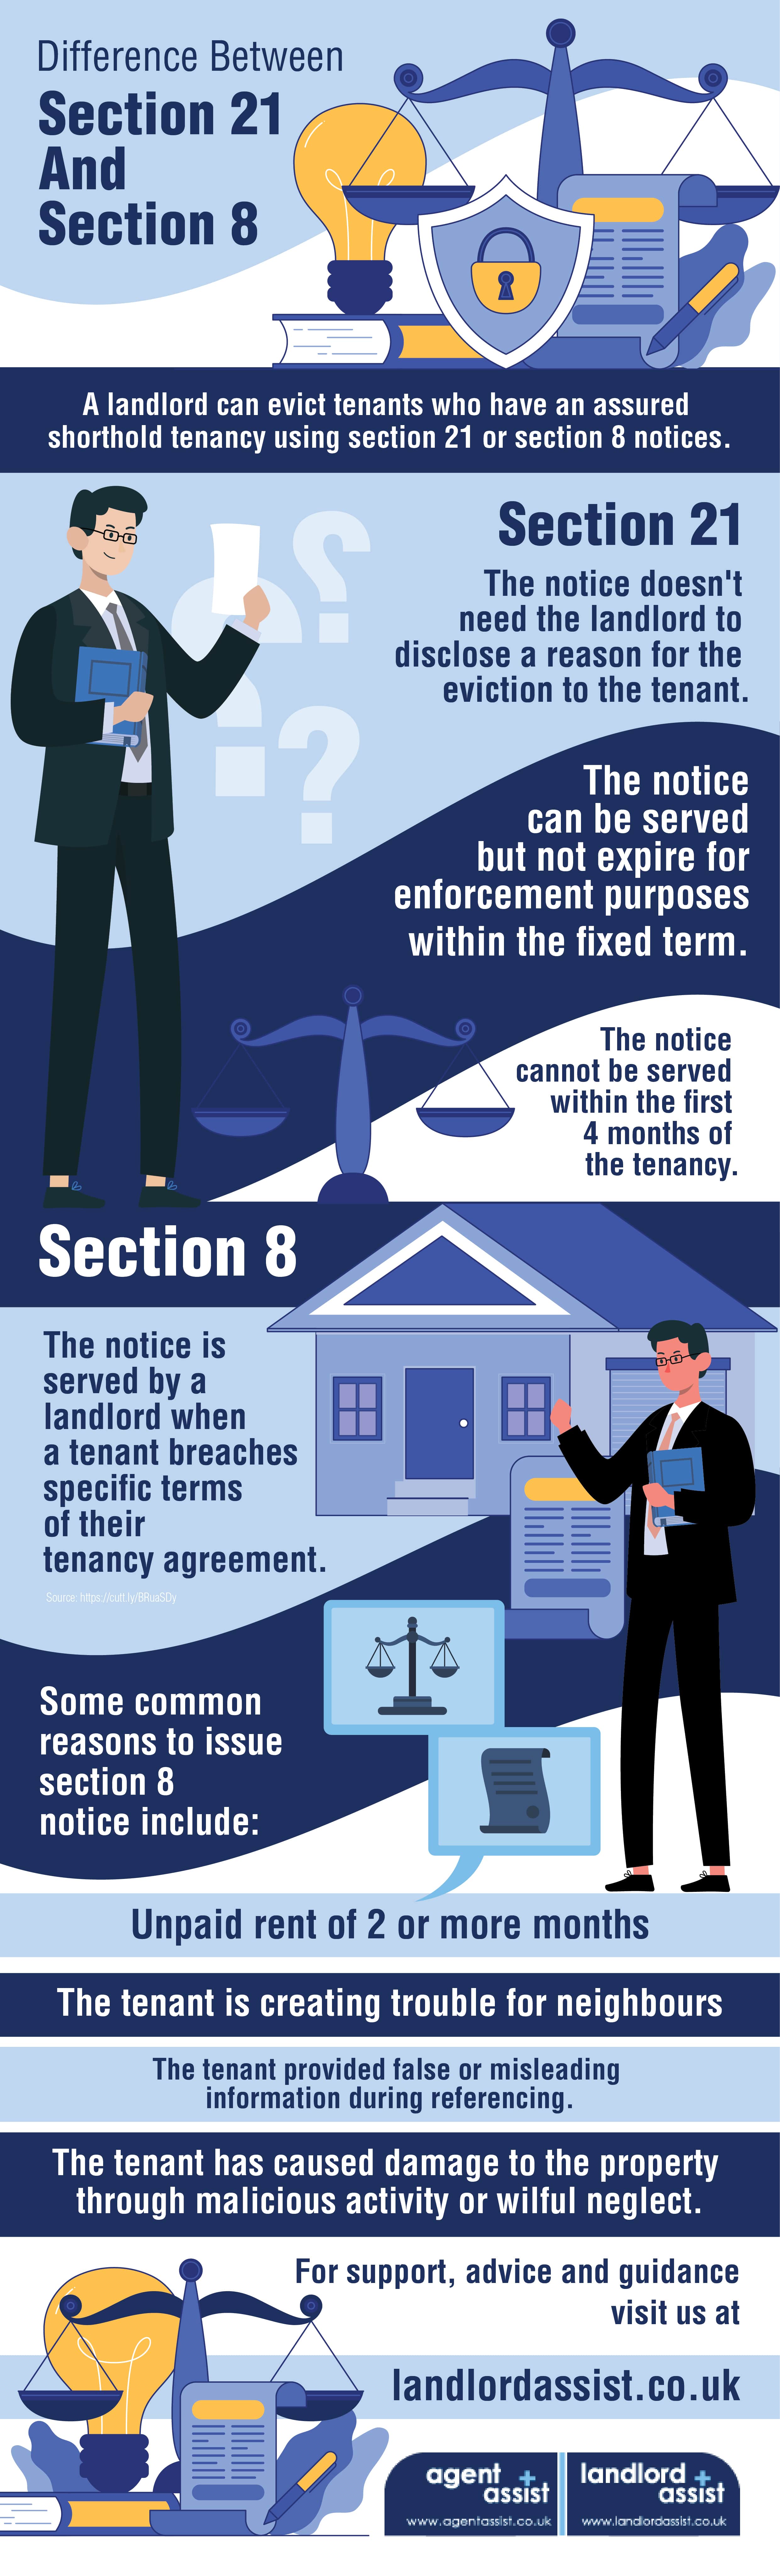 Difference-between-Section-21-and-Section-8-Infograph-min1